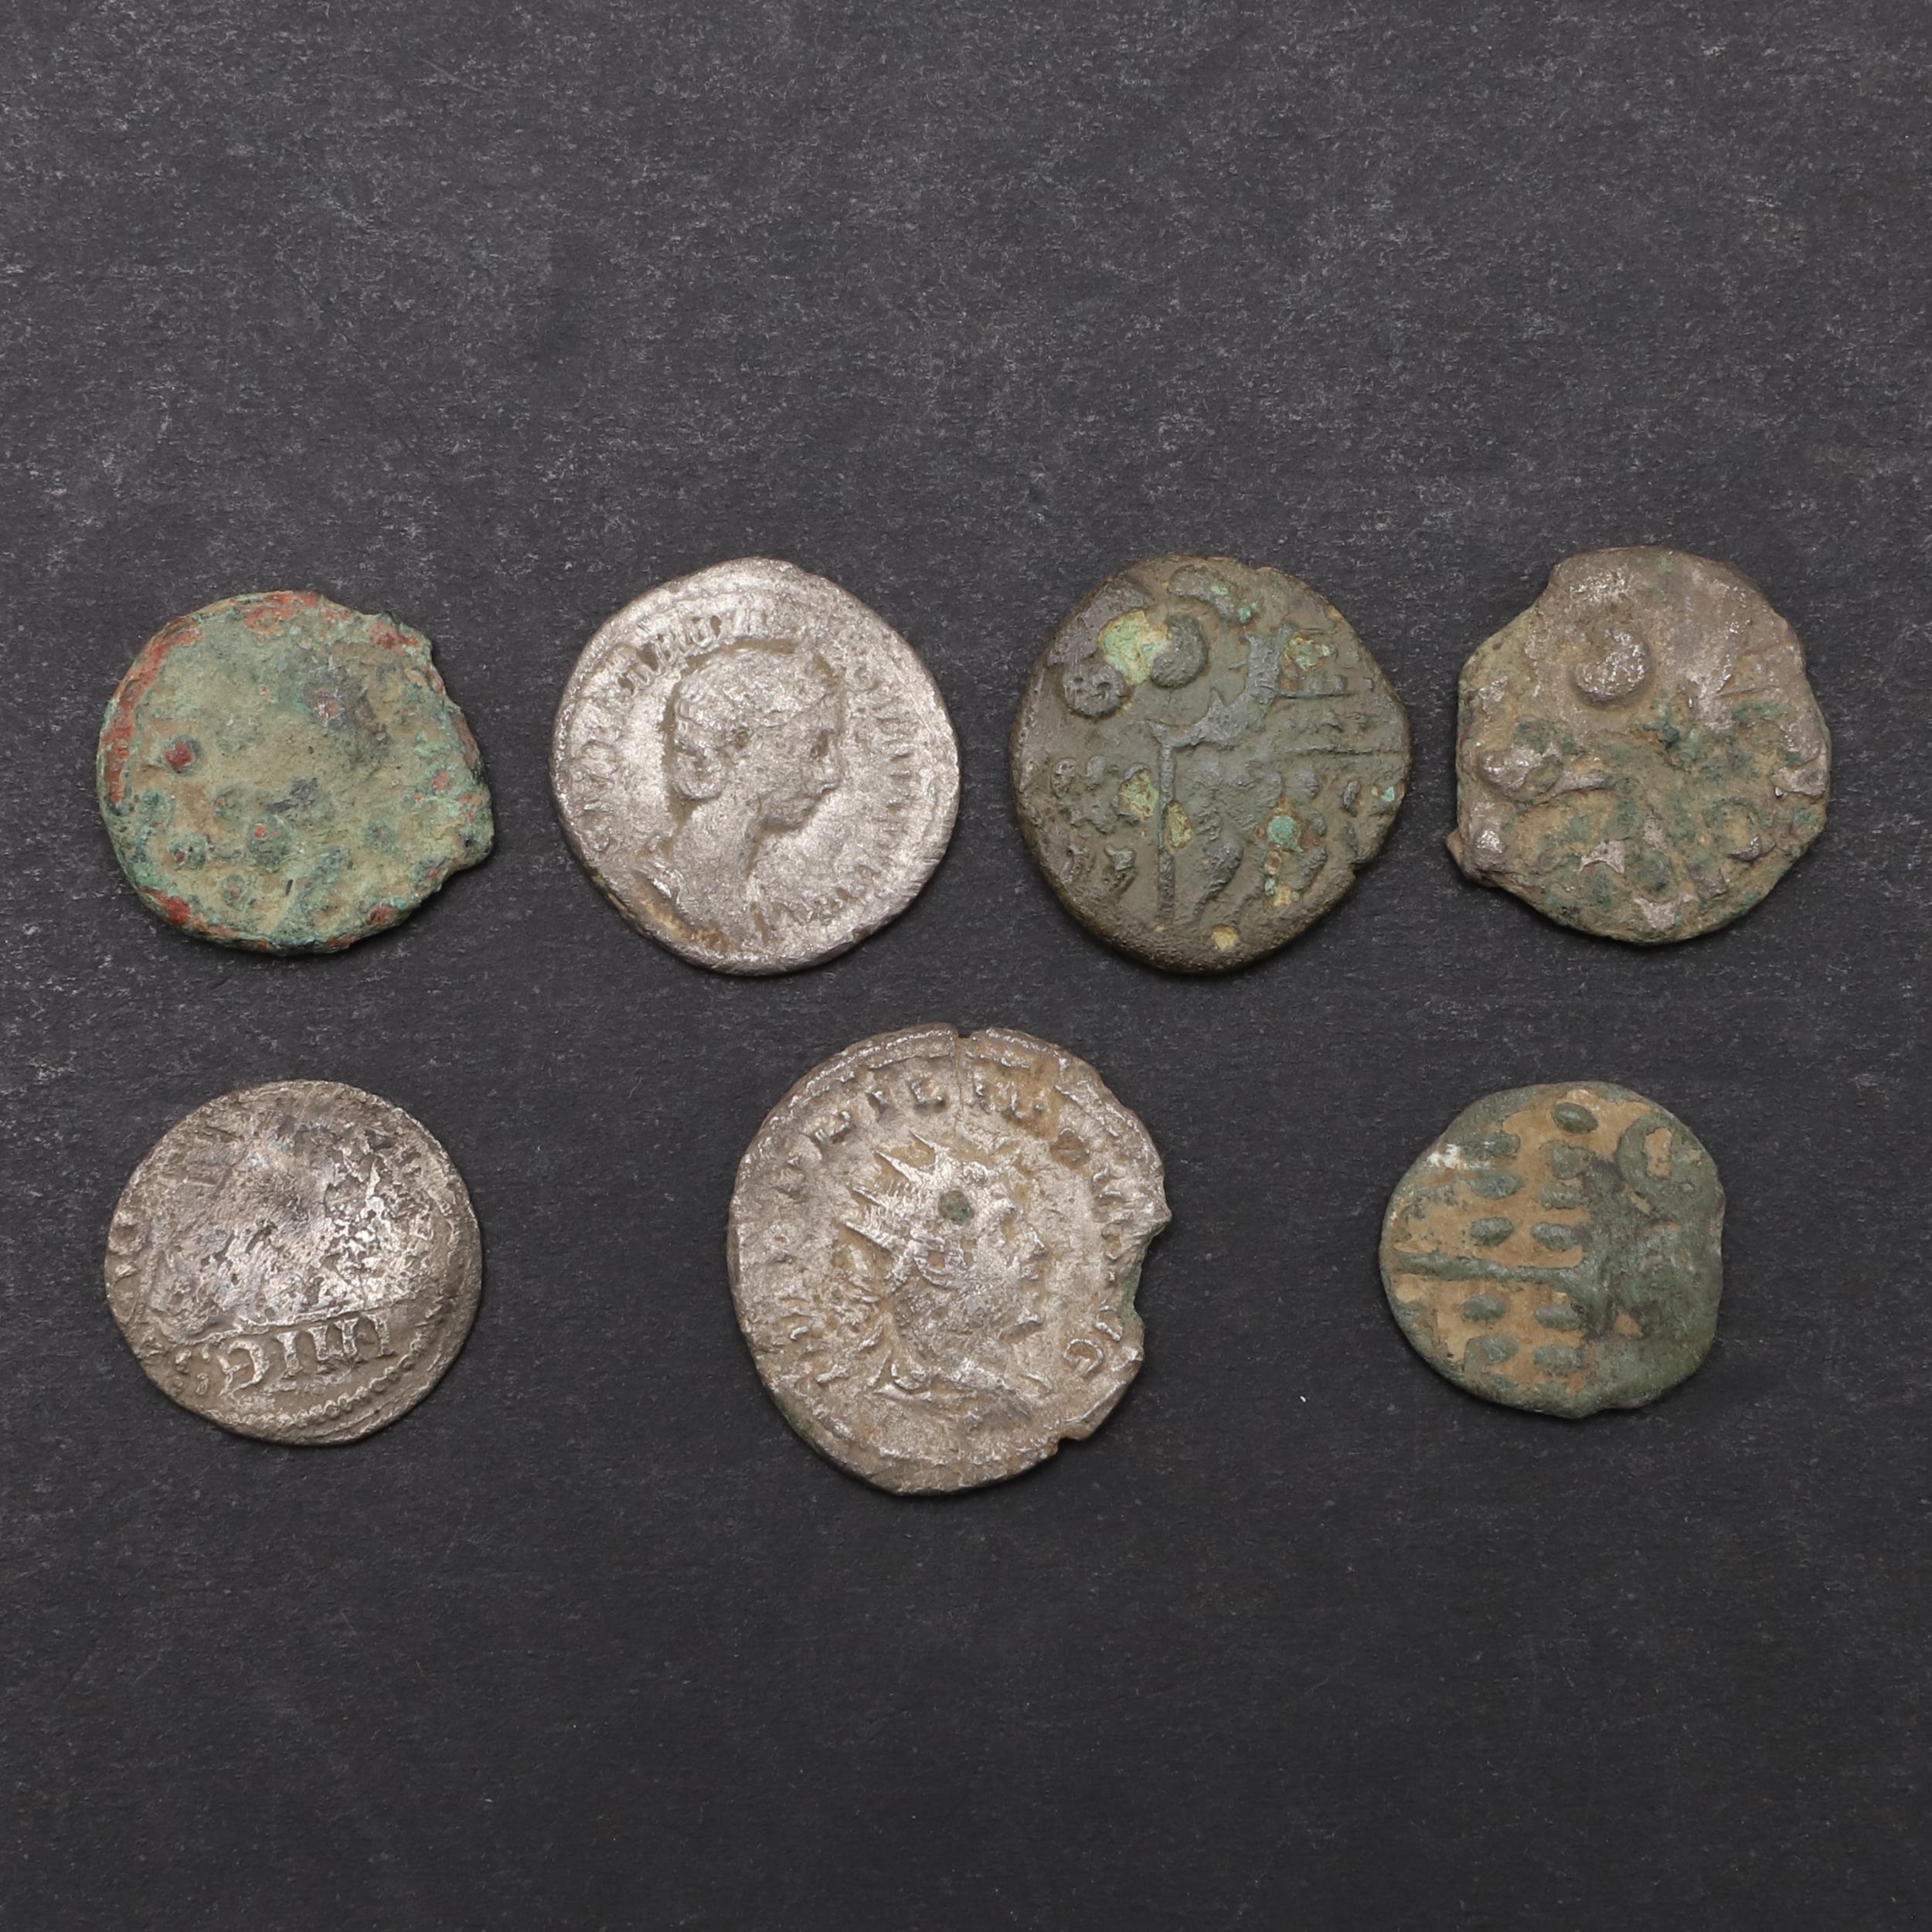 A COLLECTION OF ROMAN AND CELTIC METAL DETECTING FINDS WITH PAS NUMBERS.